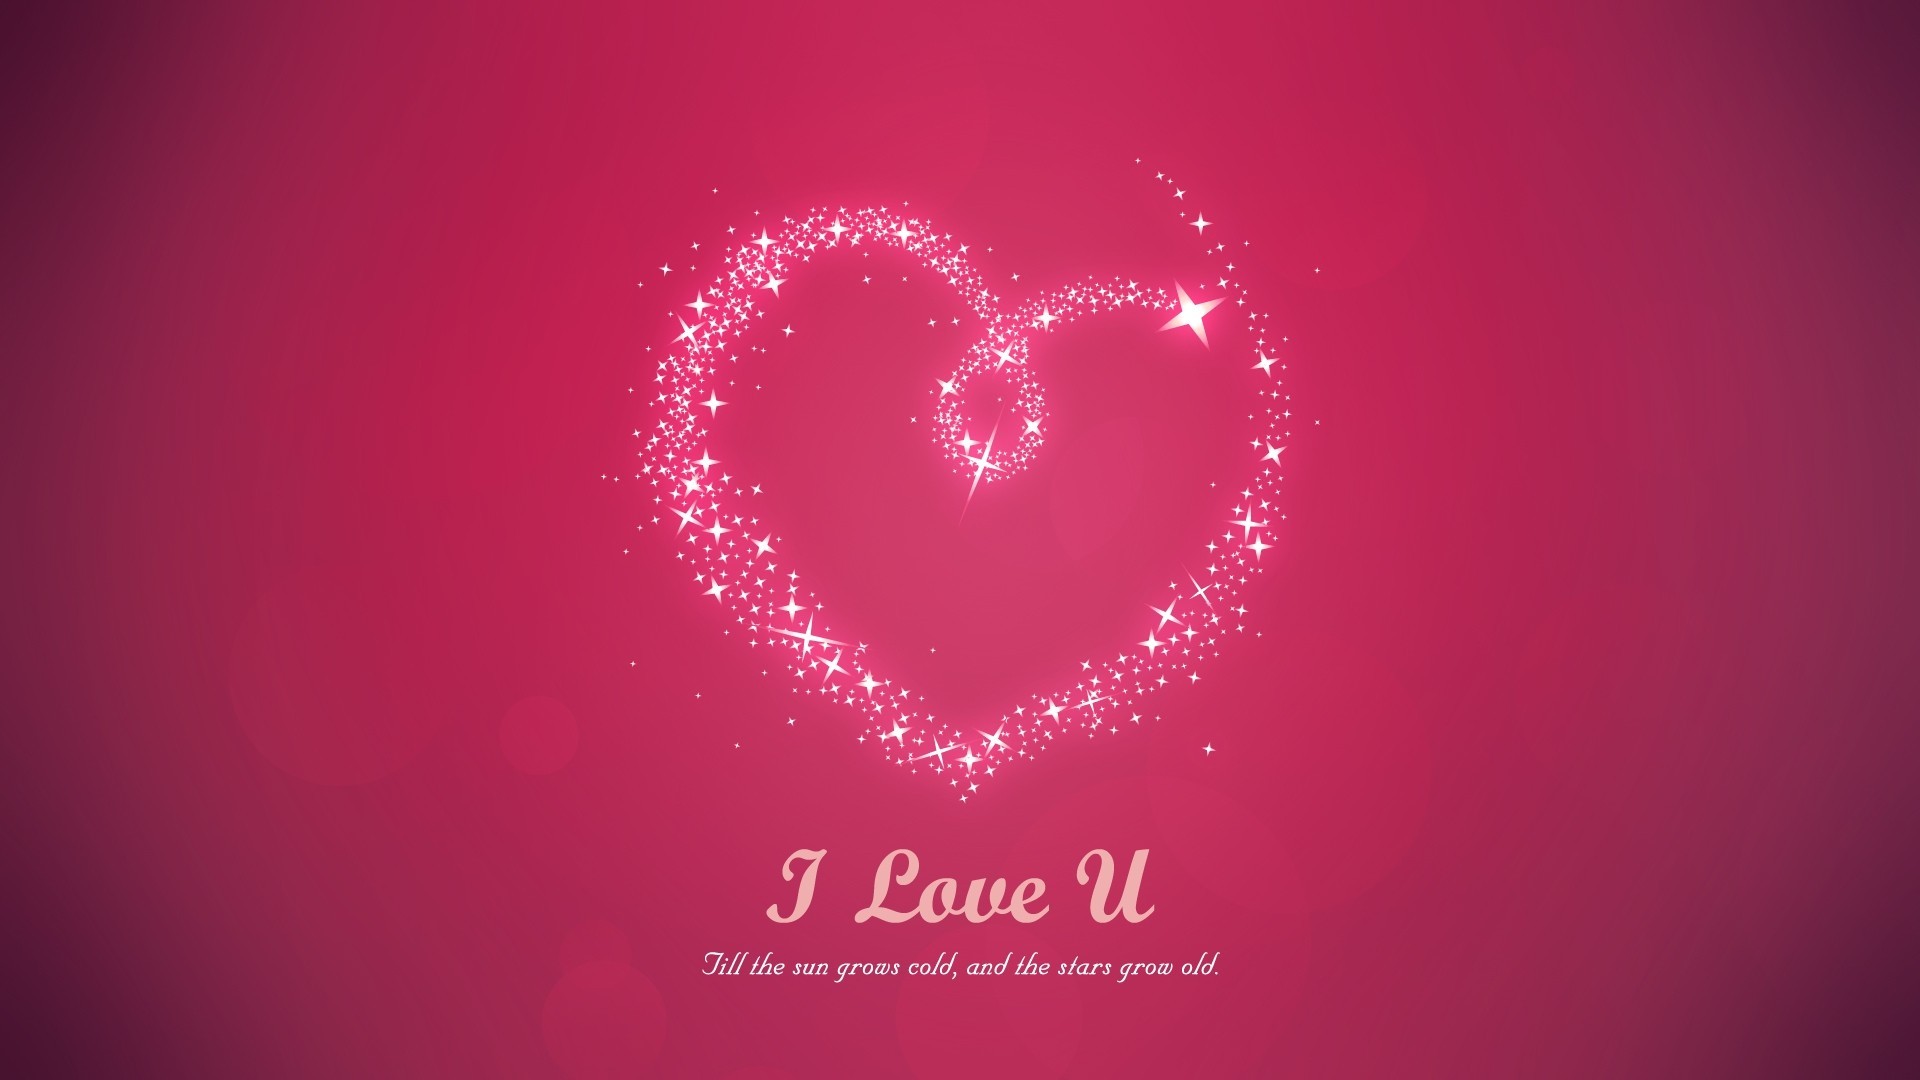 Happy valentines day for love high resolution hd valentines day greeting cards wide screen image.love hd wallpaper.lover gift love wallpaper free download